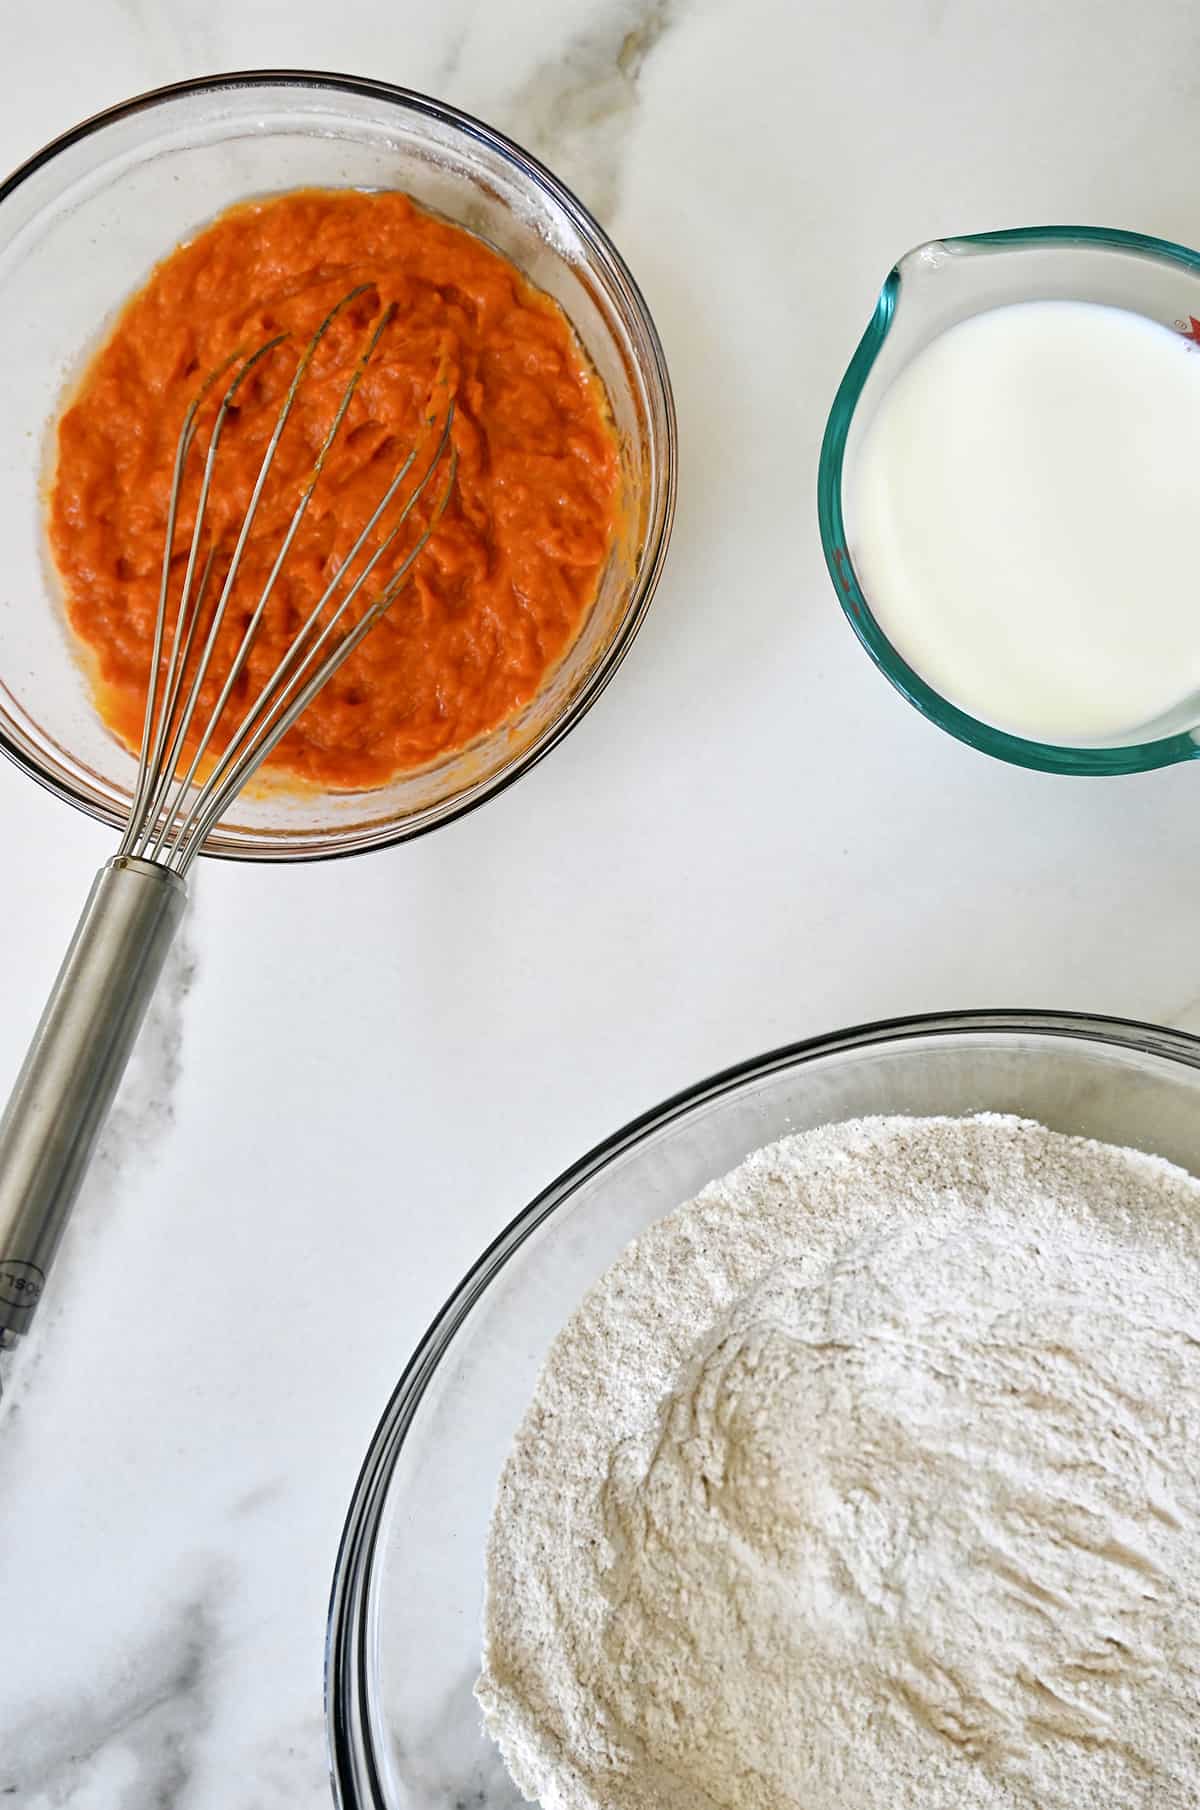 A clear bowl containing all-purpose flour next to a clear bowl containing pumpkin puree and a whisk next to a liquid measuring cup containing milk.